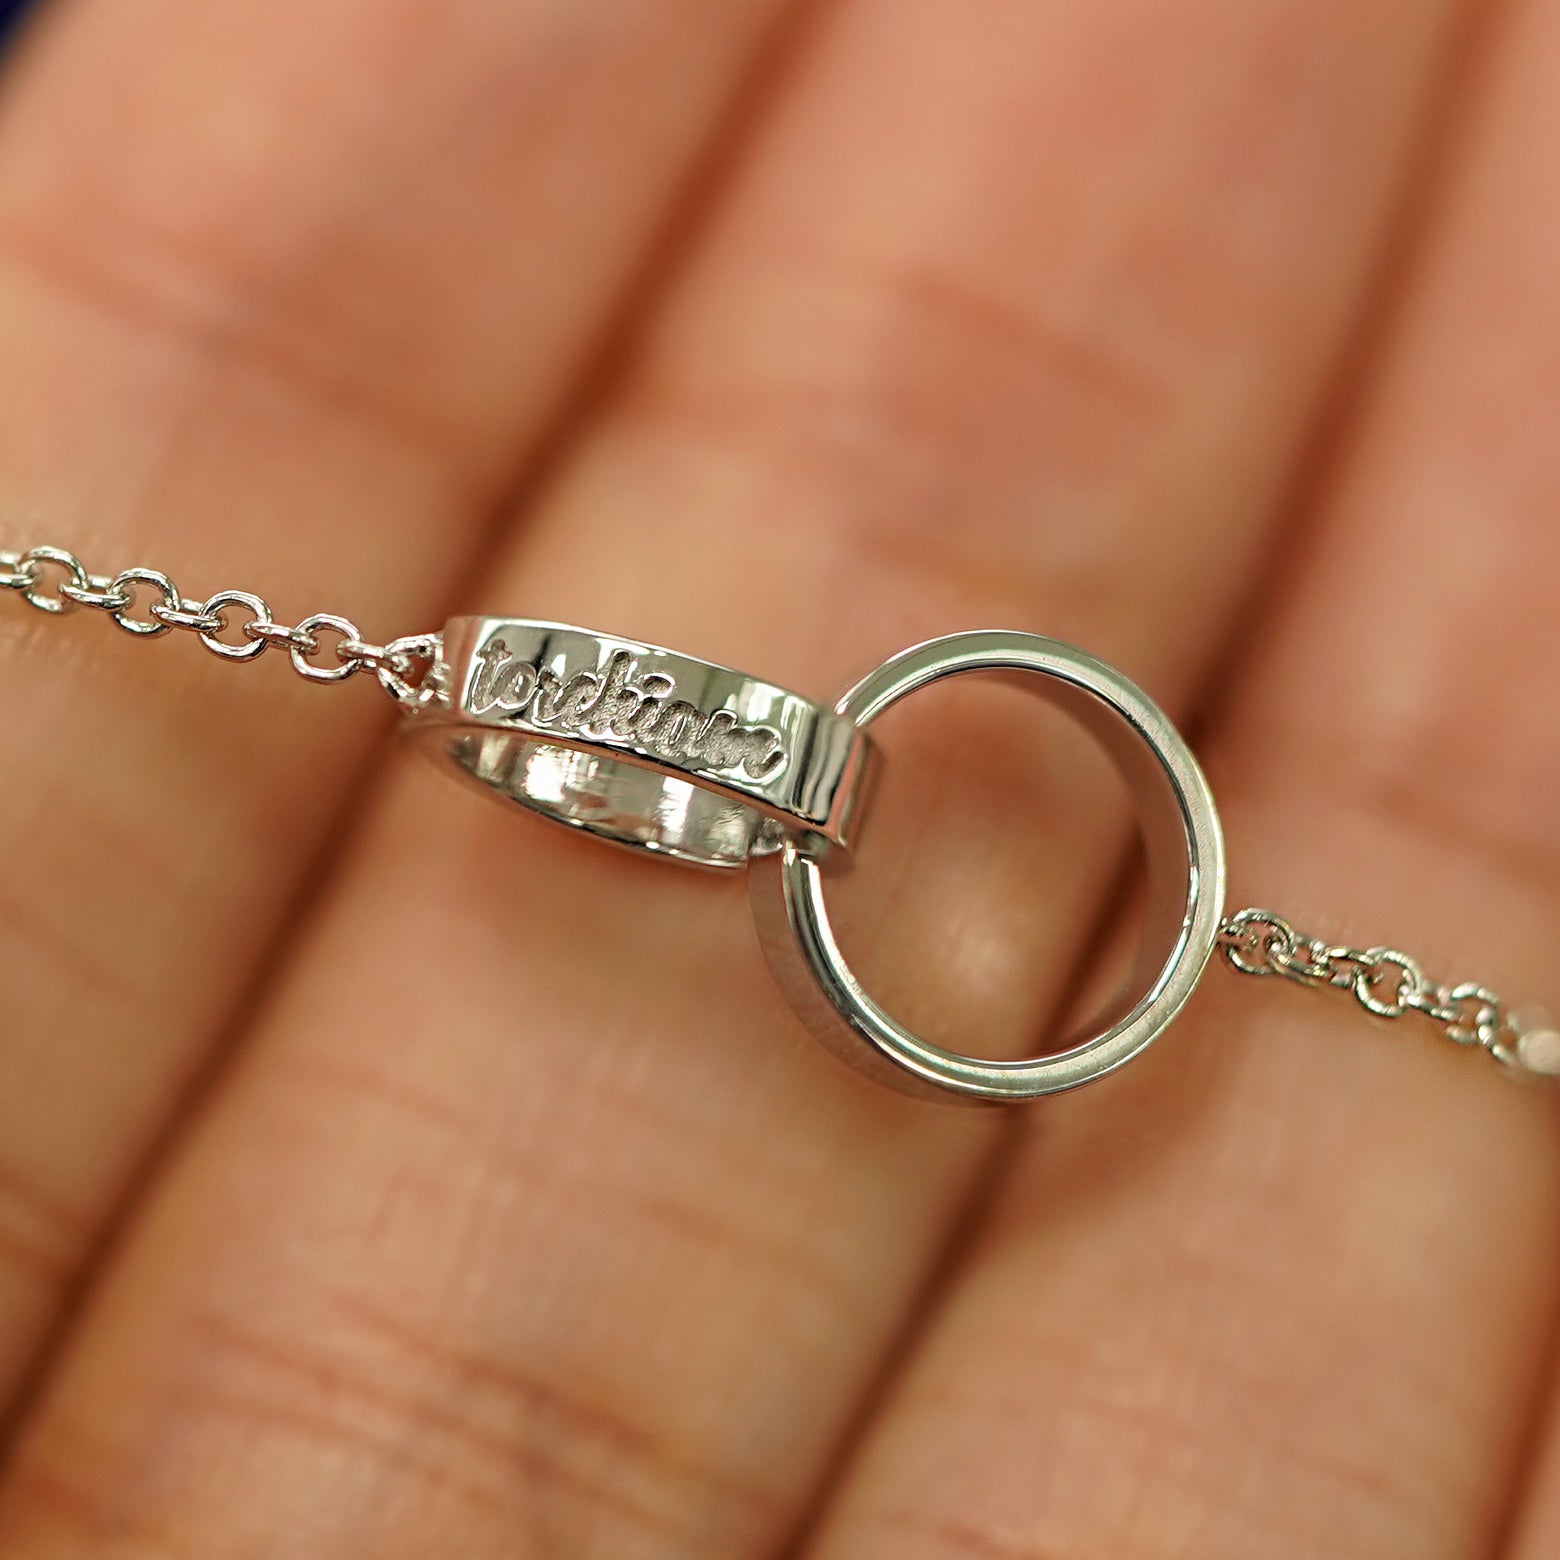 A white gold Bound Together Necklace laid across a model's fingers to show the engraving of a name on one of the rings